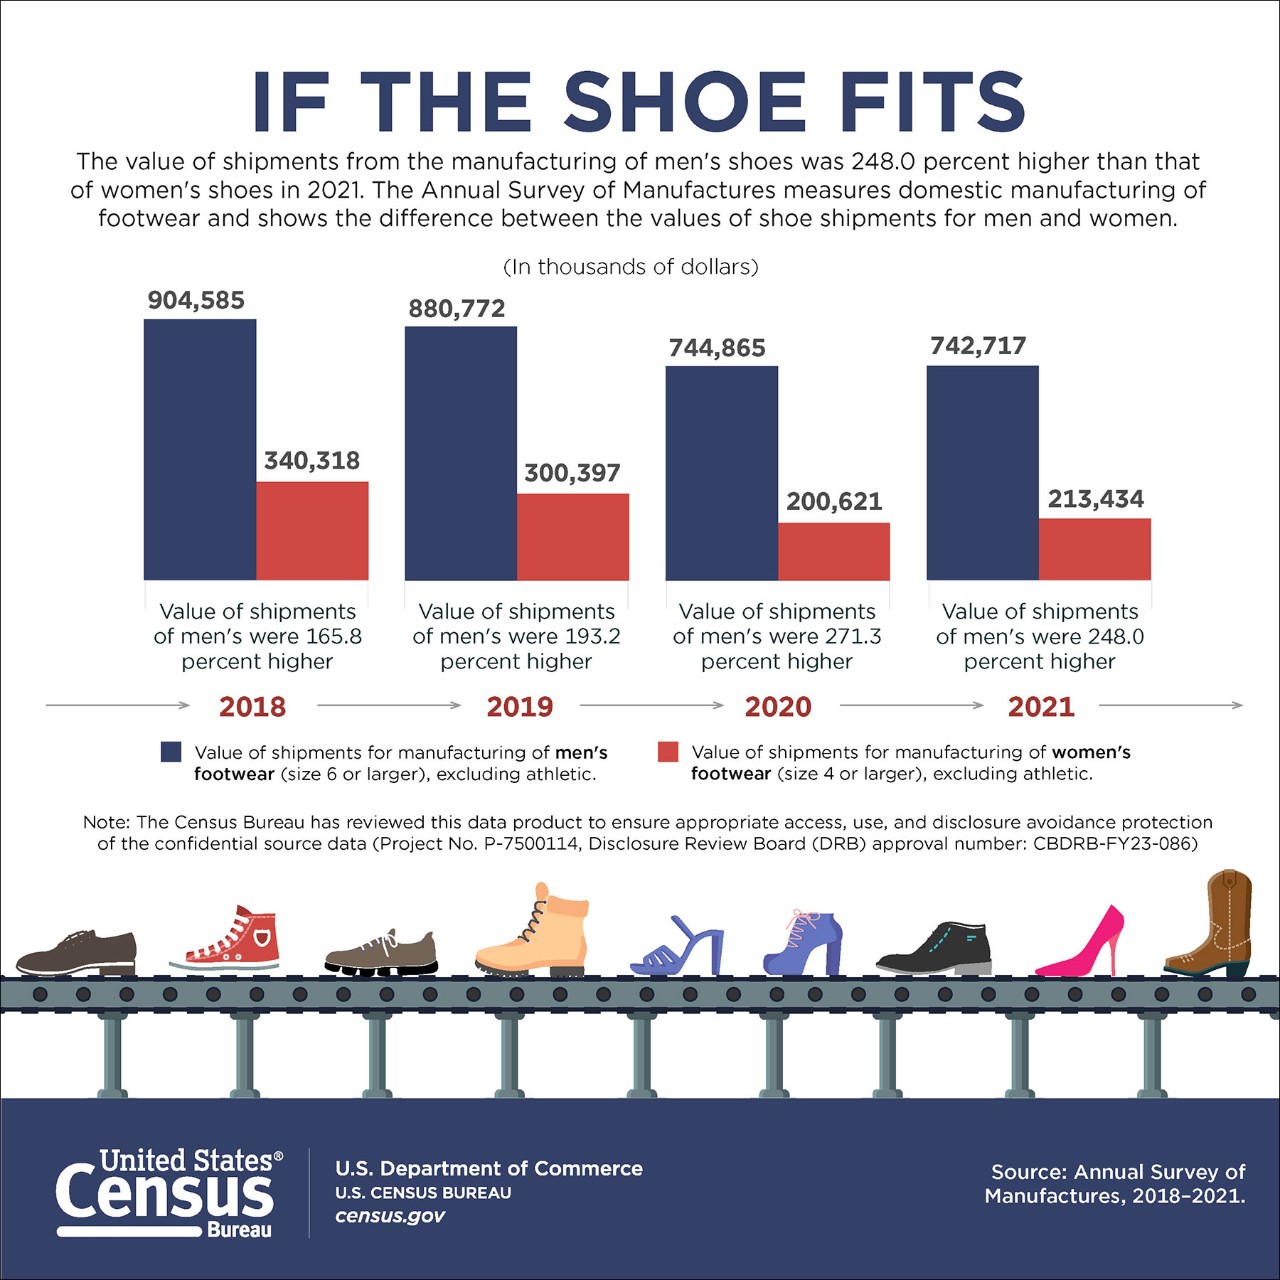 Annual Survey of Manufactures Infographic - If The Shoe Fits